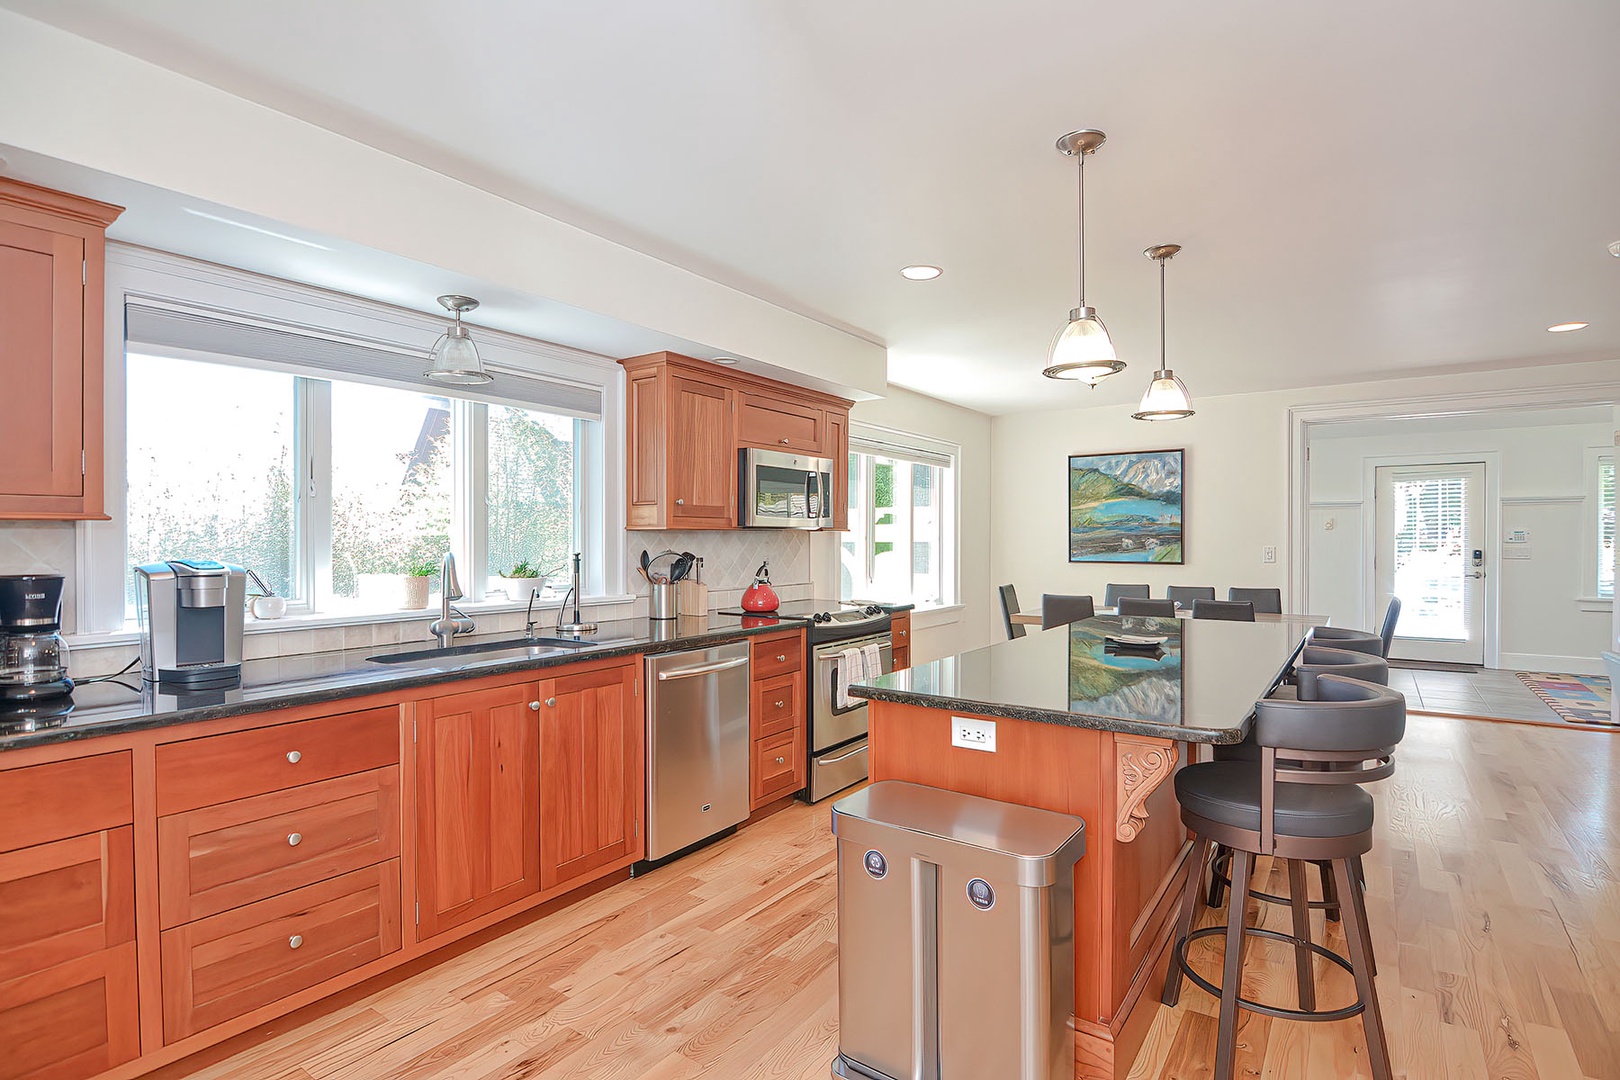 The kitchen is well-equipped with appliances and storage.